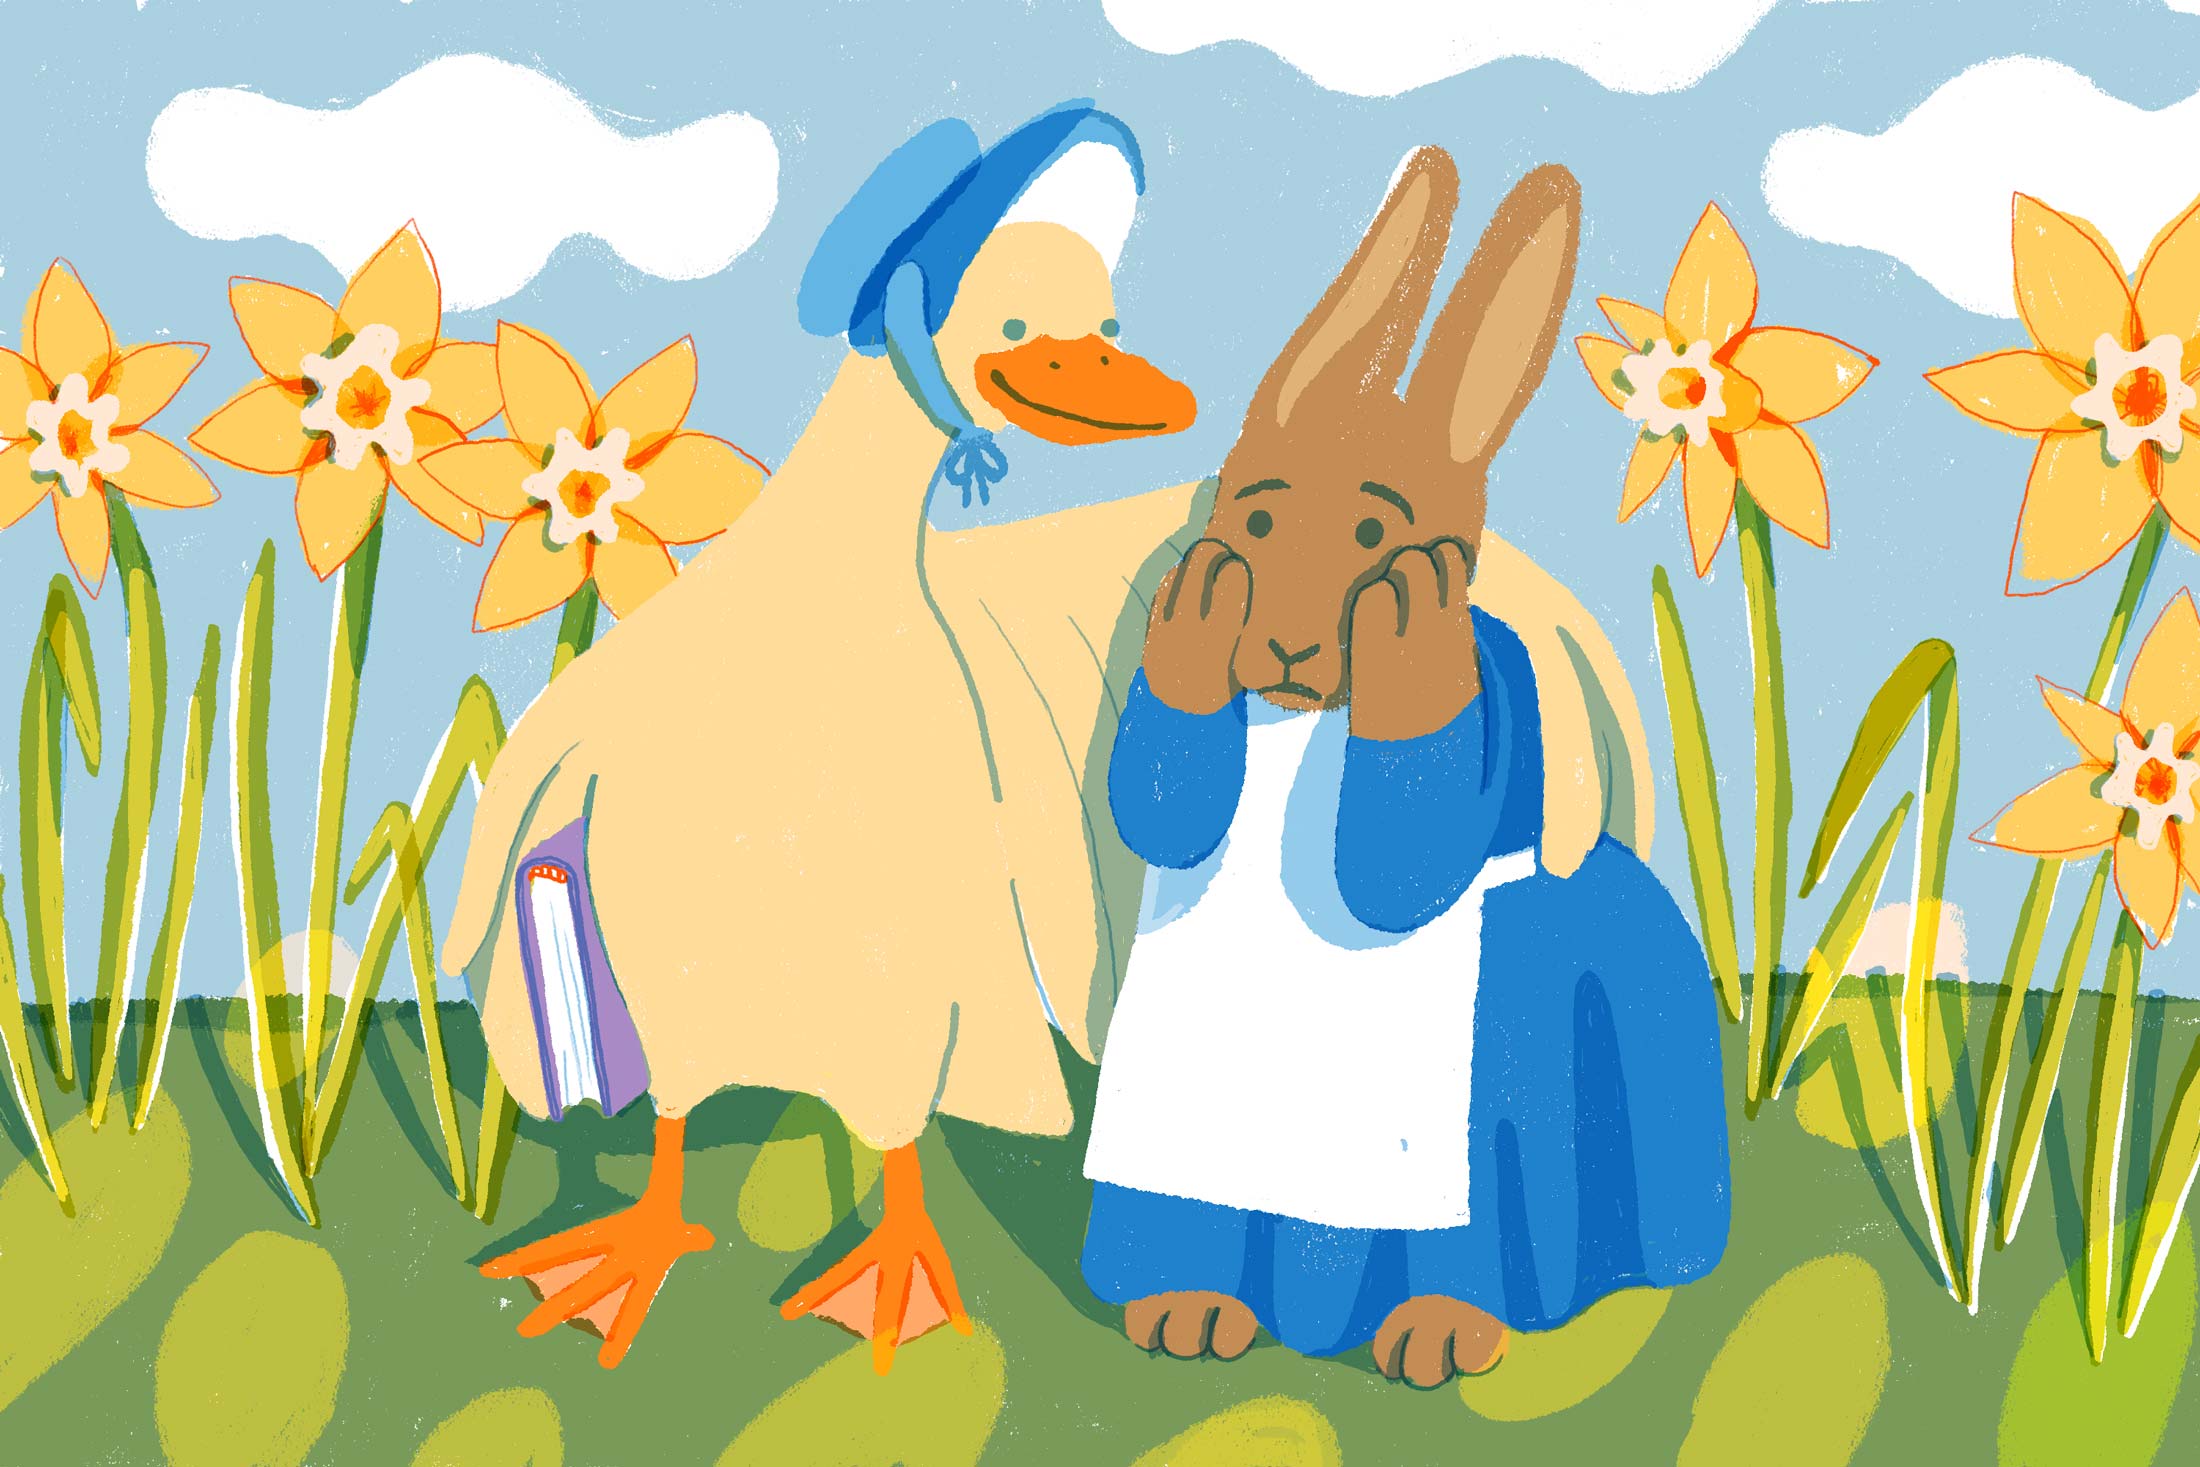 Goose wearing a bonnet consoling a stressed rabbit wearing a dress and apron.